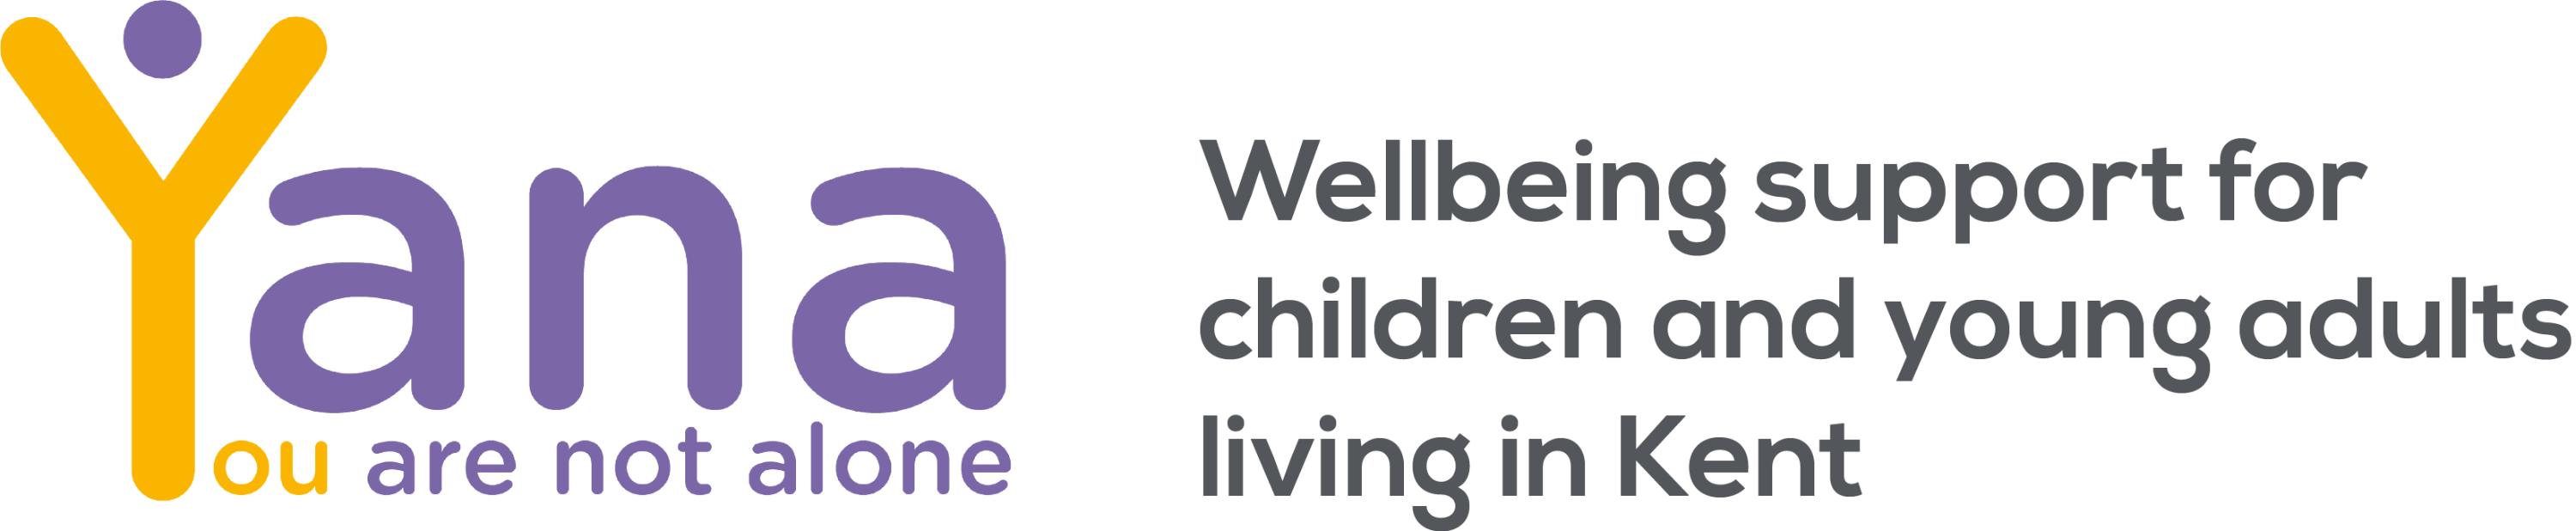 YANA wellbeing support for children and young adults living in kent